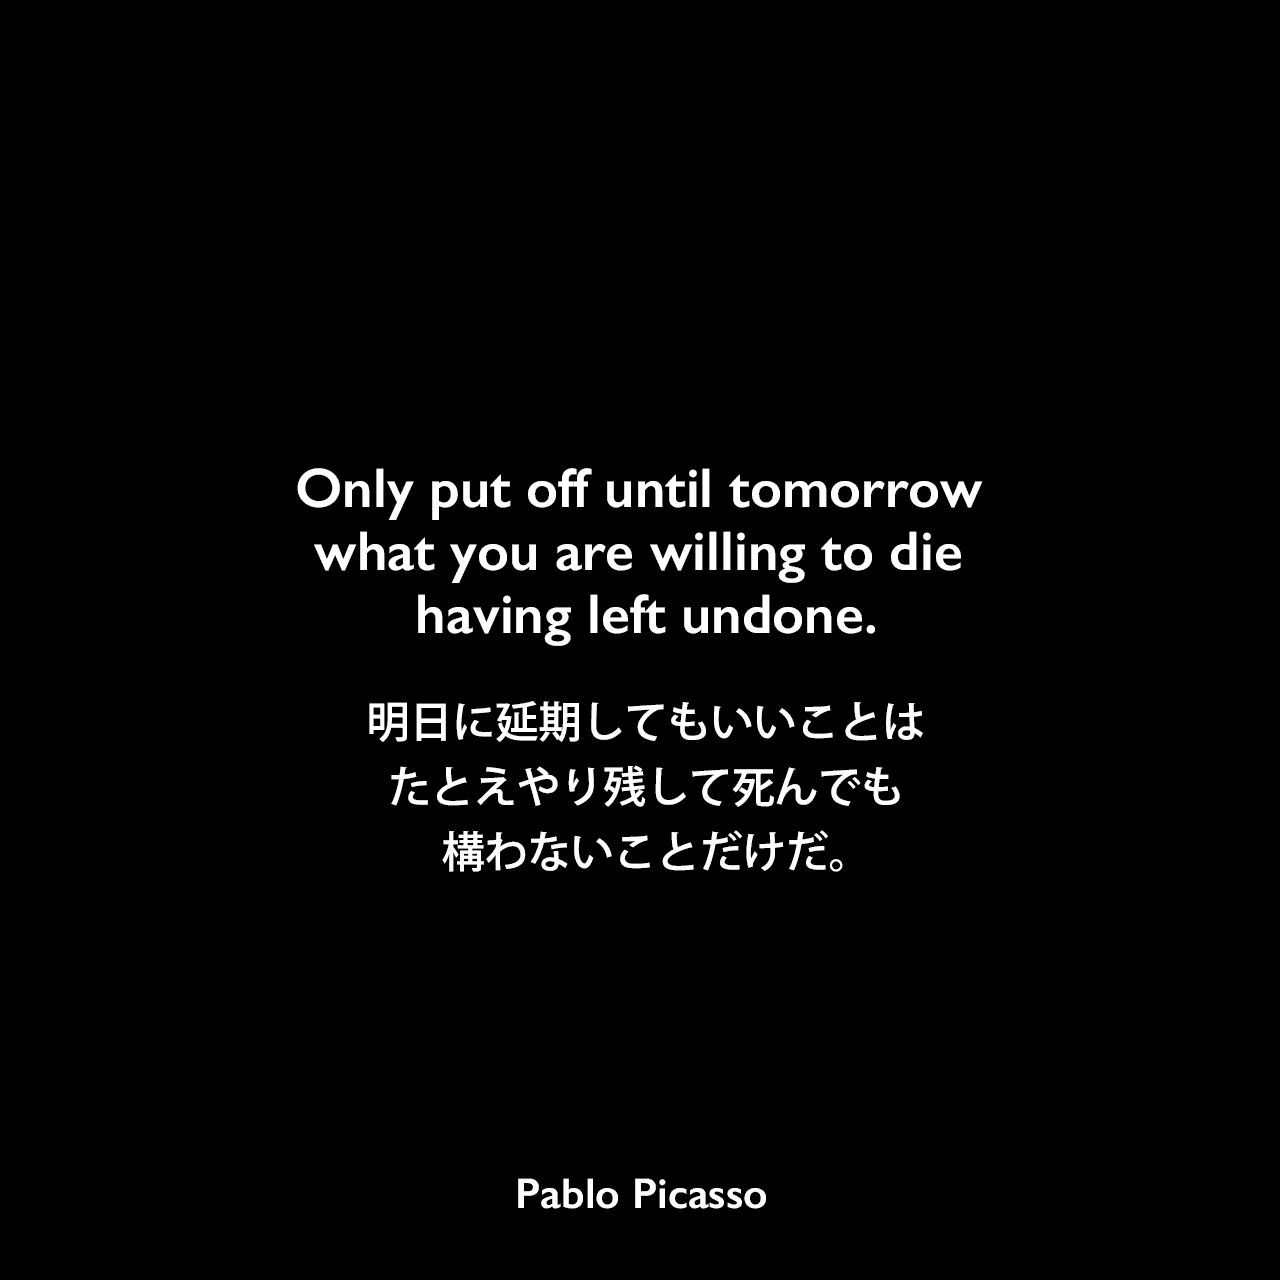 Only put off until tomorrow what you are willing to die having left undone.明日に延期してもいいことは、たとえやり残して死んでも構わないことだけだ。